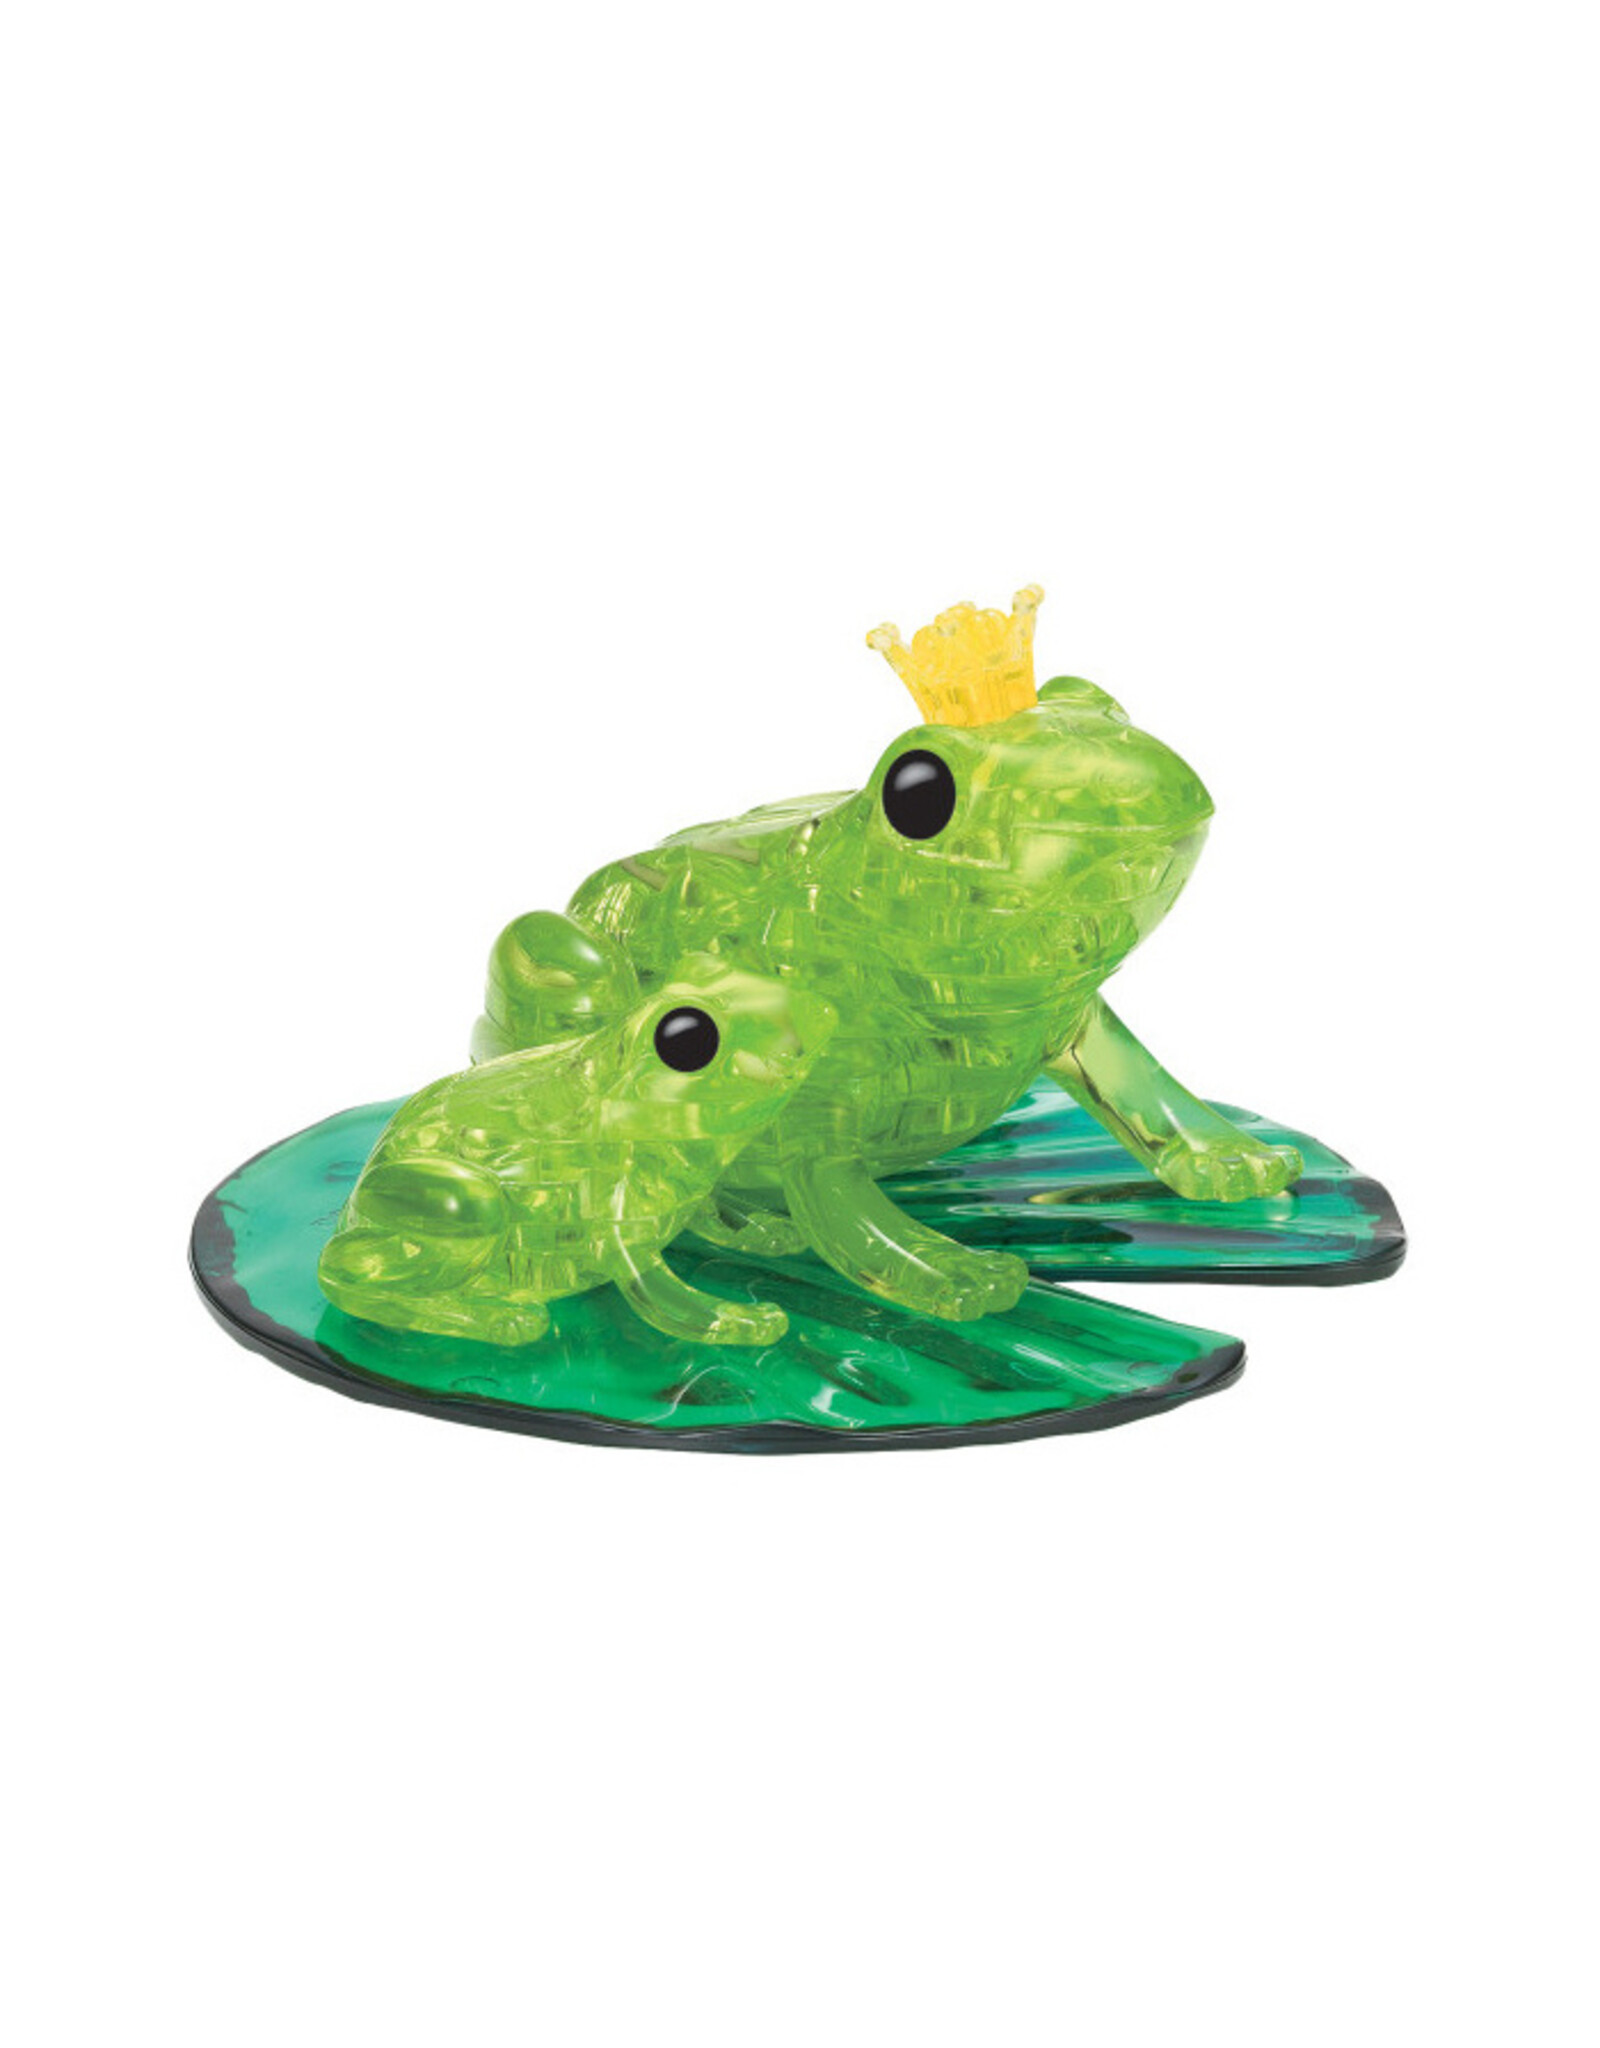 University Games Puzzle: 3D Crystal: Frog